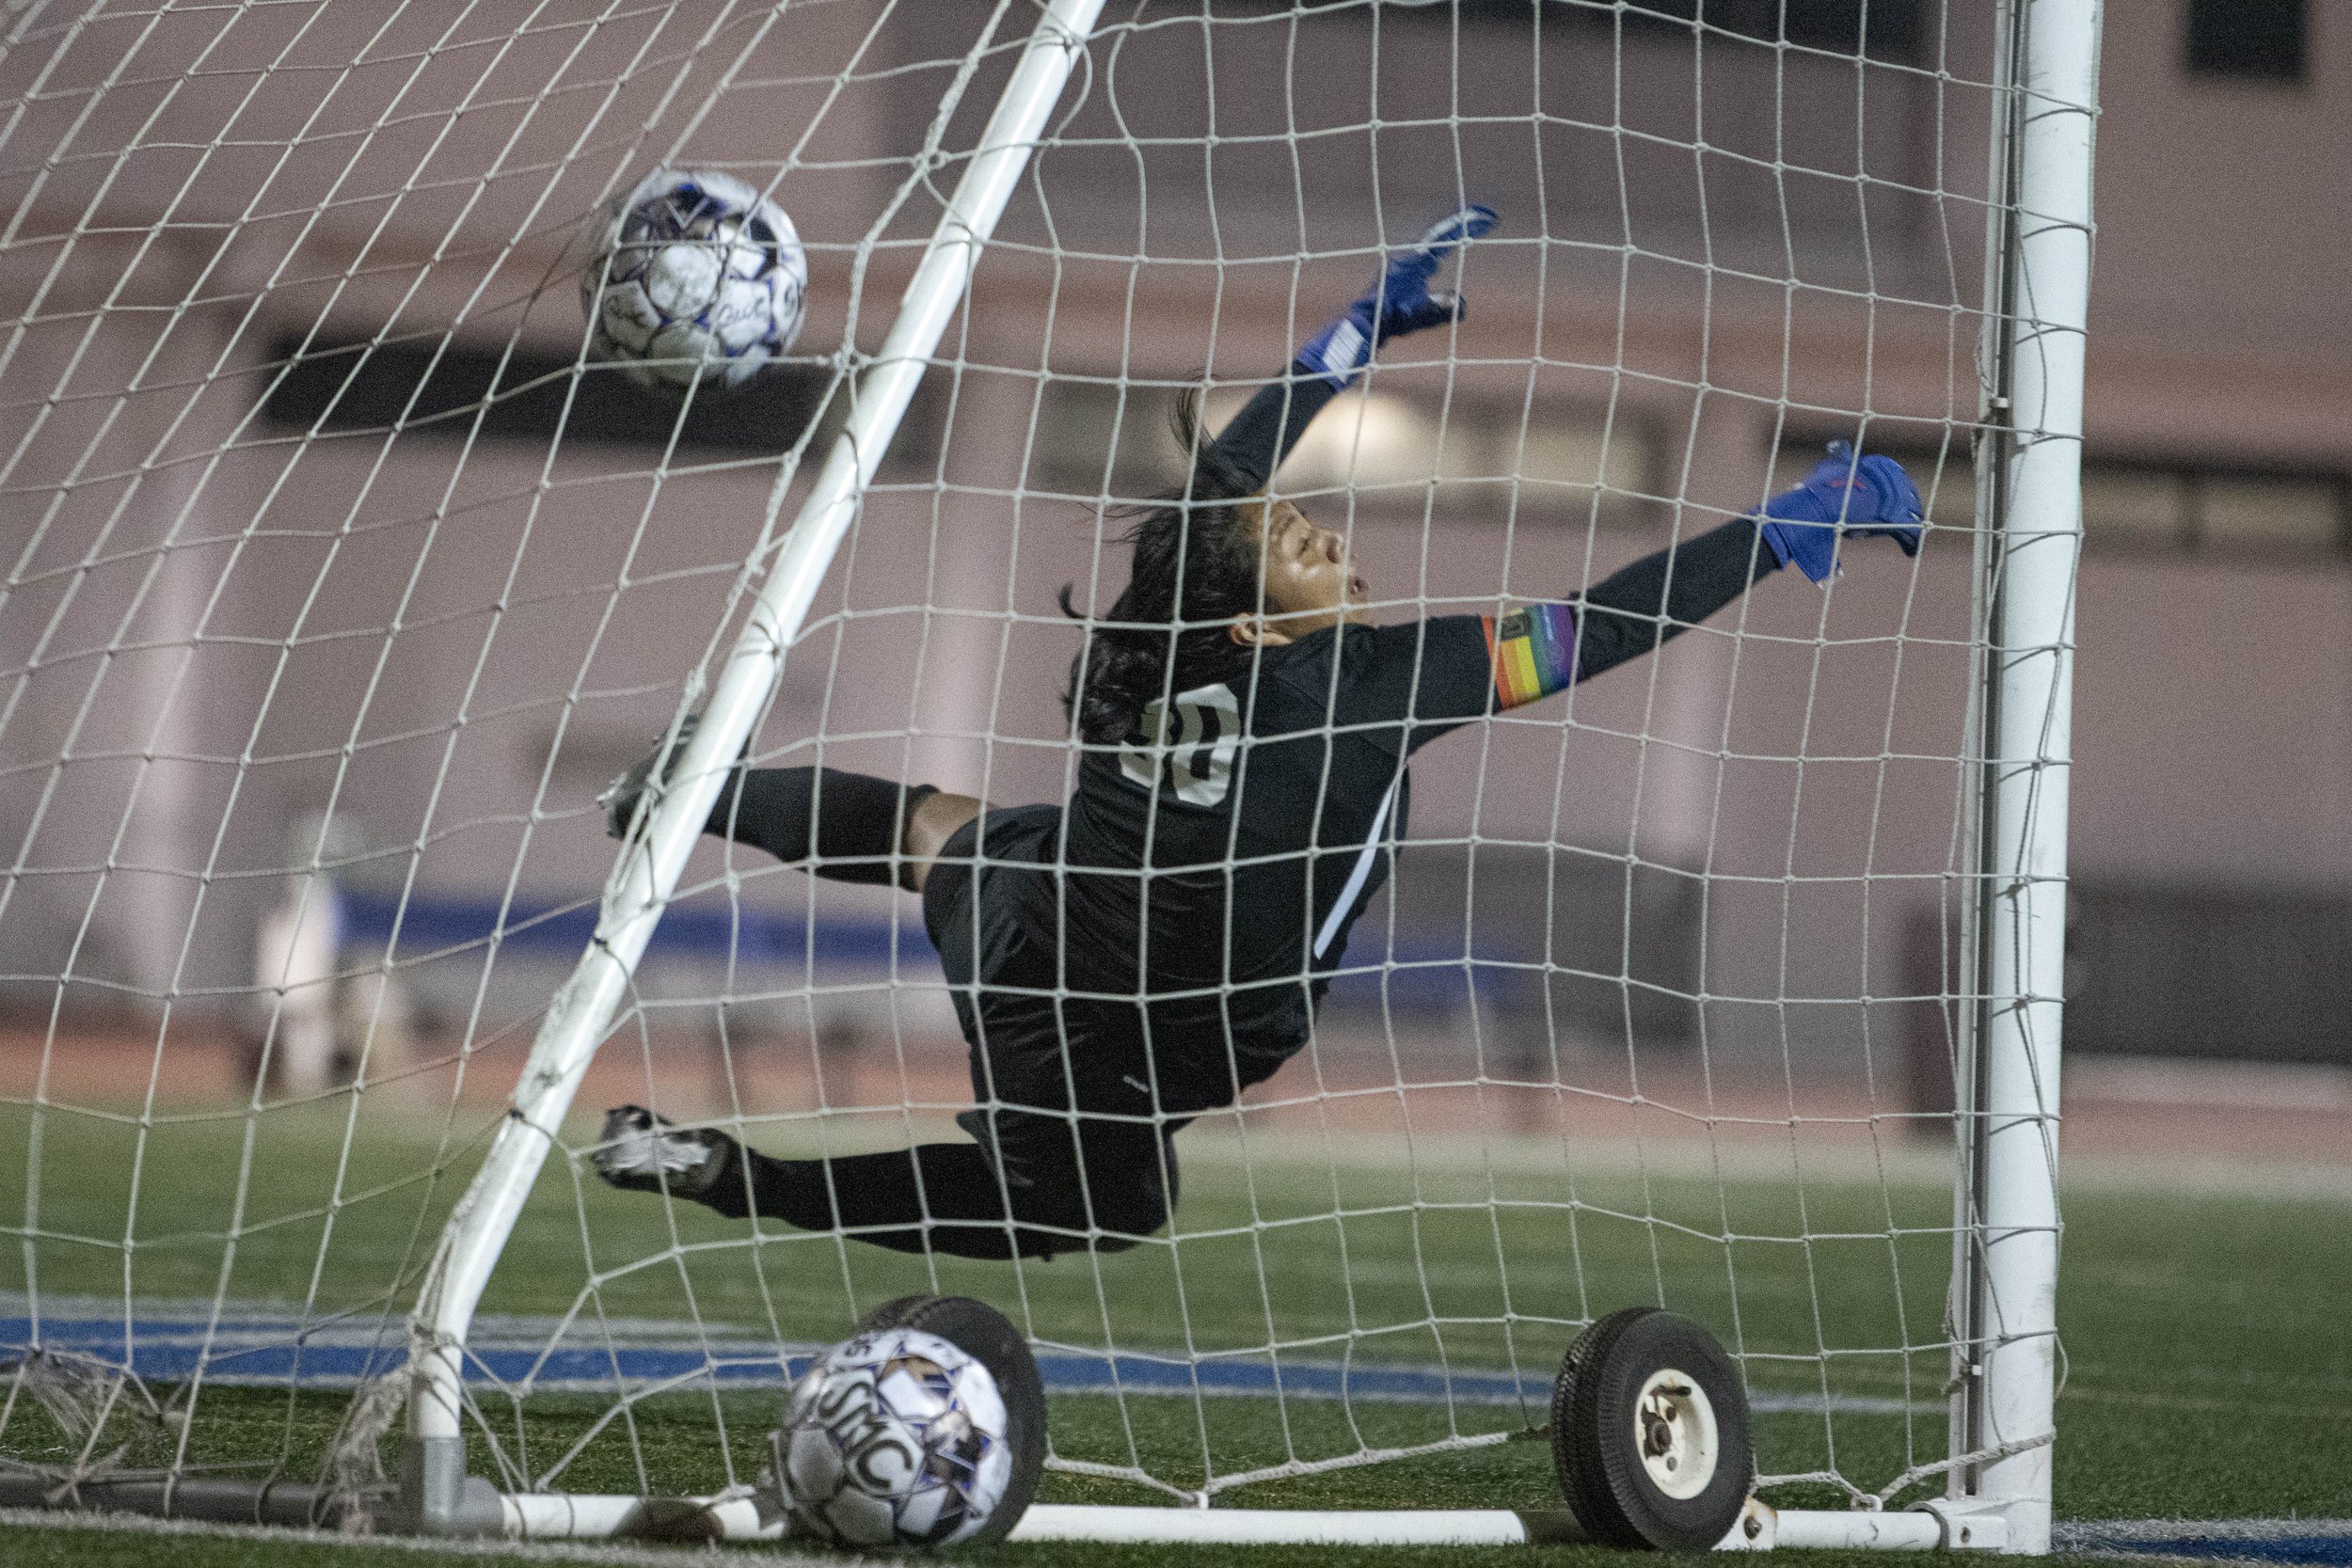  Santa Monica College Corsairs sophomore goalie Yosemite Cruz (30) misses on the final shoot out attempt from El Camino College giving the Corsairs the loss on Nov. 18, 2021 at Santa Monica College. (Jon Putman | The Corsair) 